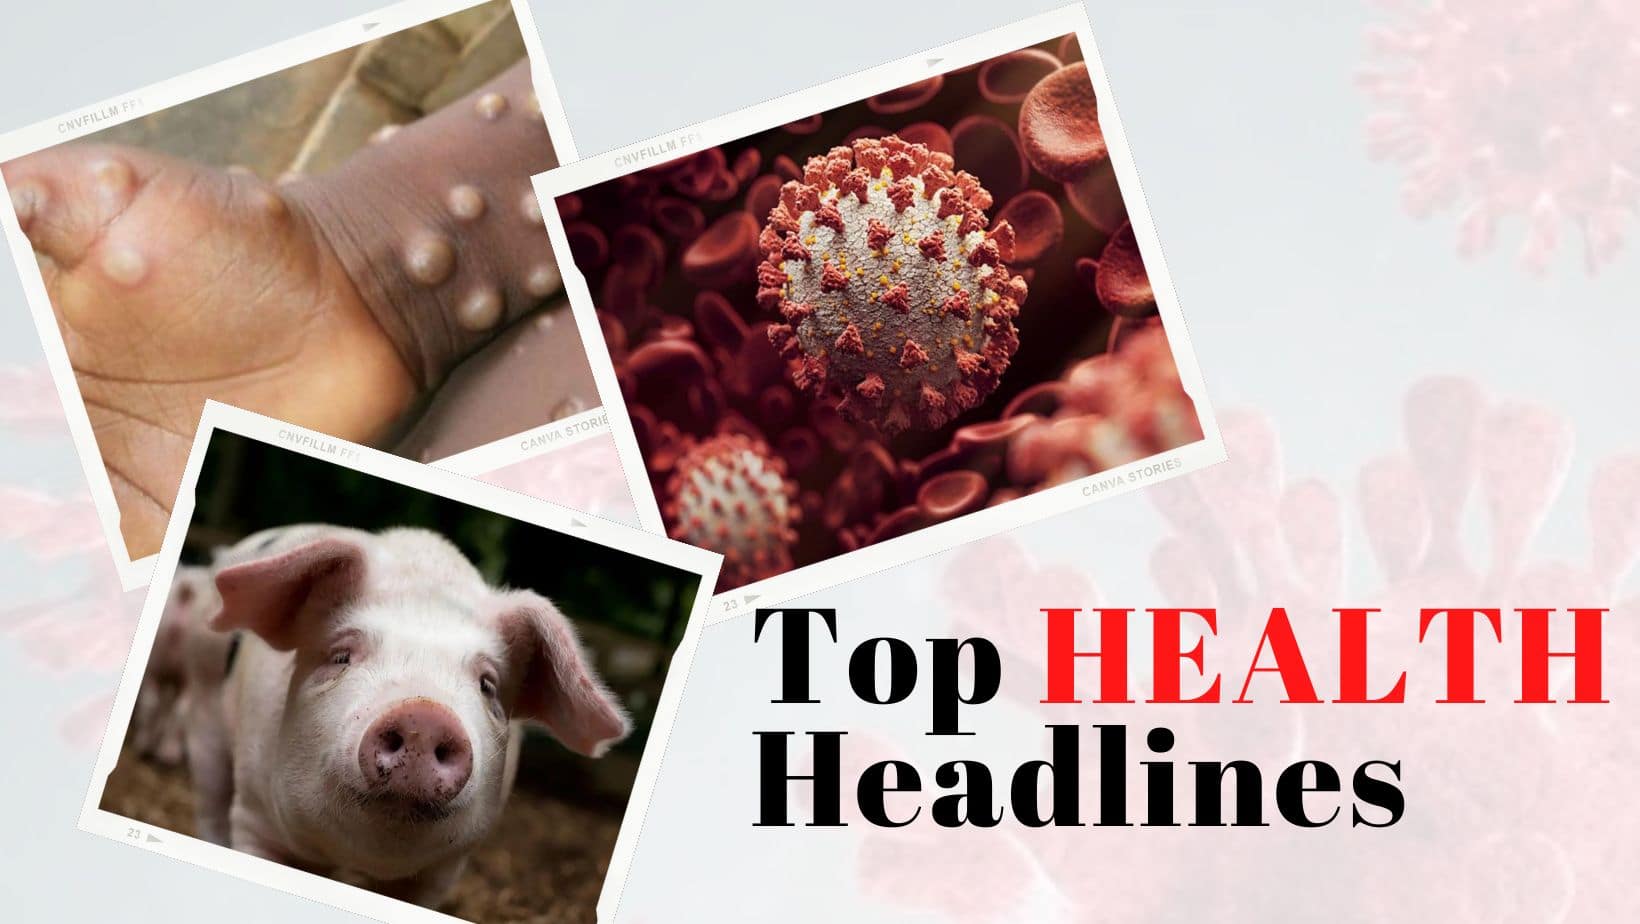 Punjab Monitoring Lumpy Disease Outbreak To COVID Cases Reaching A New High In Delhi: Top Headlines Of The Day